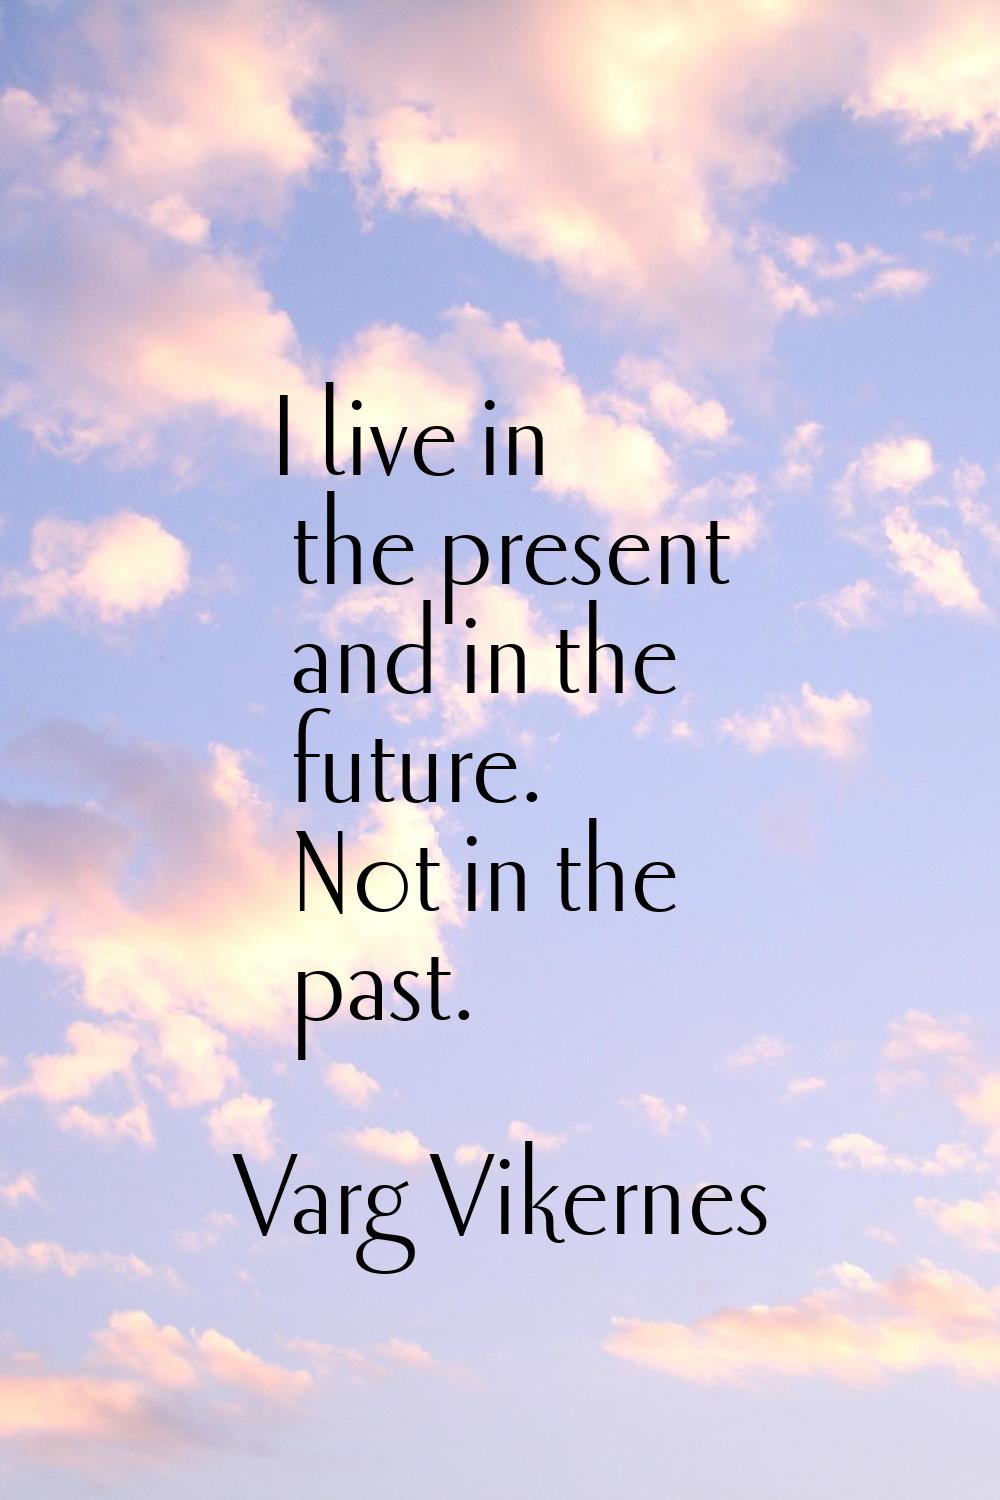 I live in the present and in the future. Not in the past.